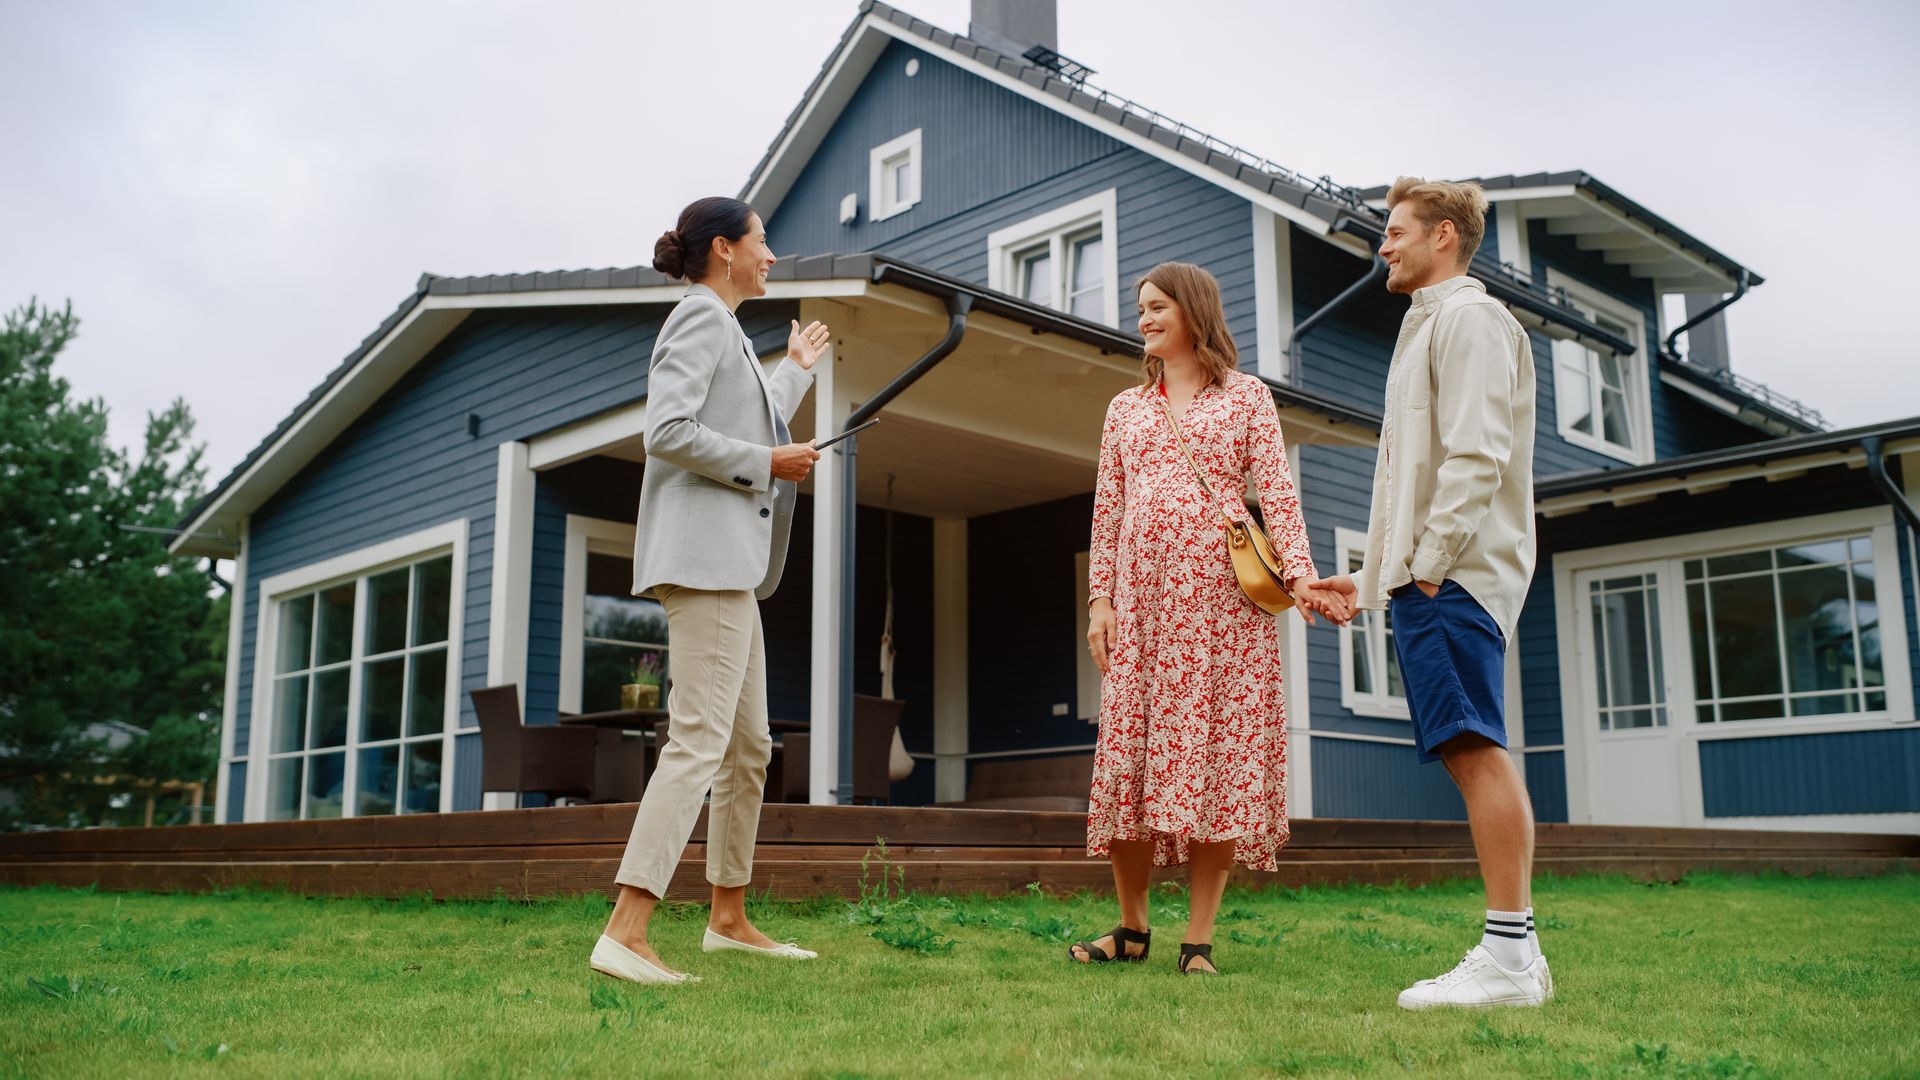 3 Things Every Home Buyer Should Ask Their REALTOR®